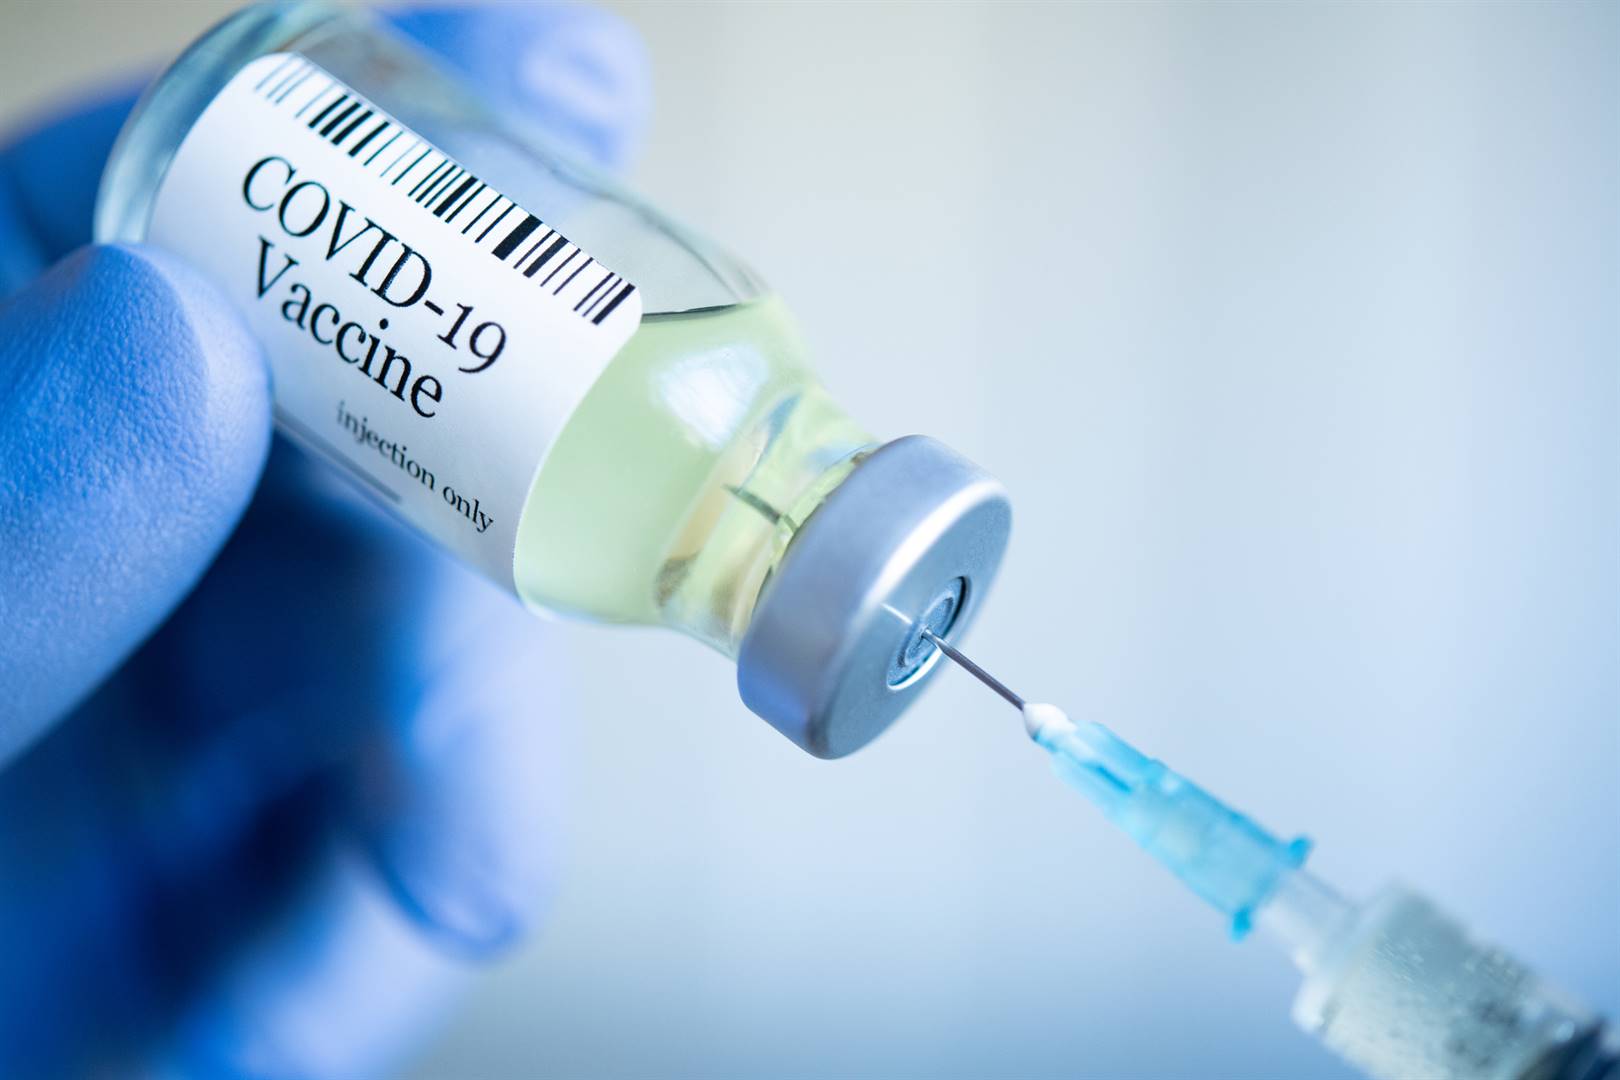 Undocumented refugees often don't go for their Covid019 vaccine for fear of being deported, write the authors. Photo: iStock